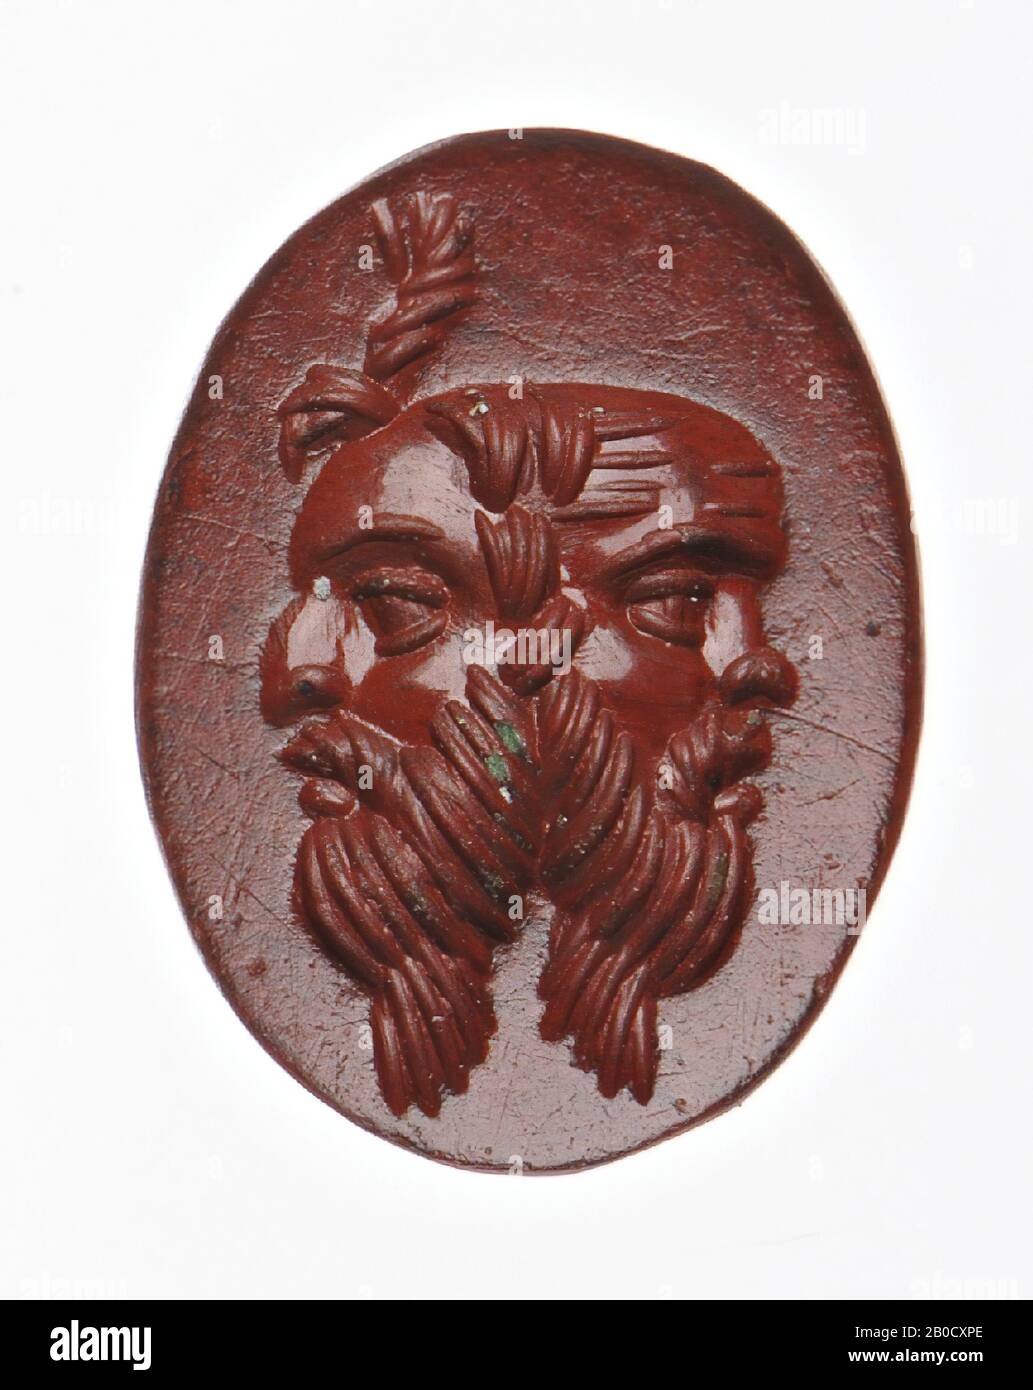 Vz: mask of a bald and bearded Silenus depicted with the back to the back of another mask of a bearded man with a strange lock of hair on his forehead., Gem, intaglio, ringstone, jasper, Color: red , Shape: oval, Machined: edge cut at the back with respect to the front, Method: modeling with rounded drill, detailing with parallel rounded wheel grooves., 12 x 9 mm, D. 3 mm, 1st - 2nd century AD . 1-200 AD Stock Photo